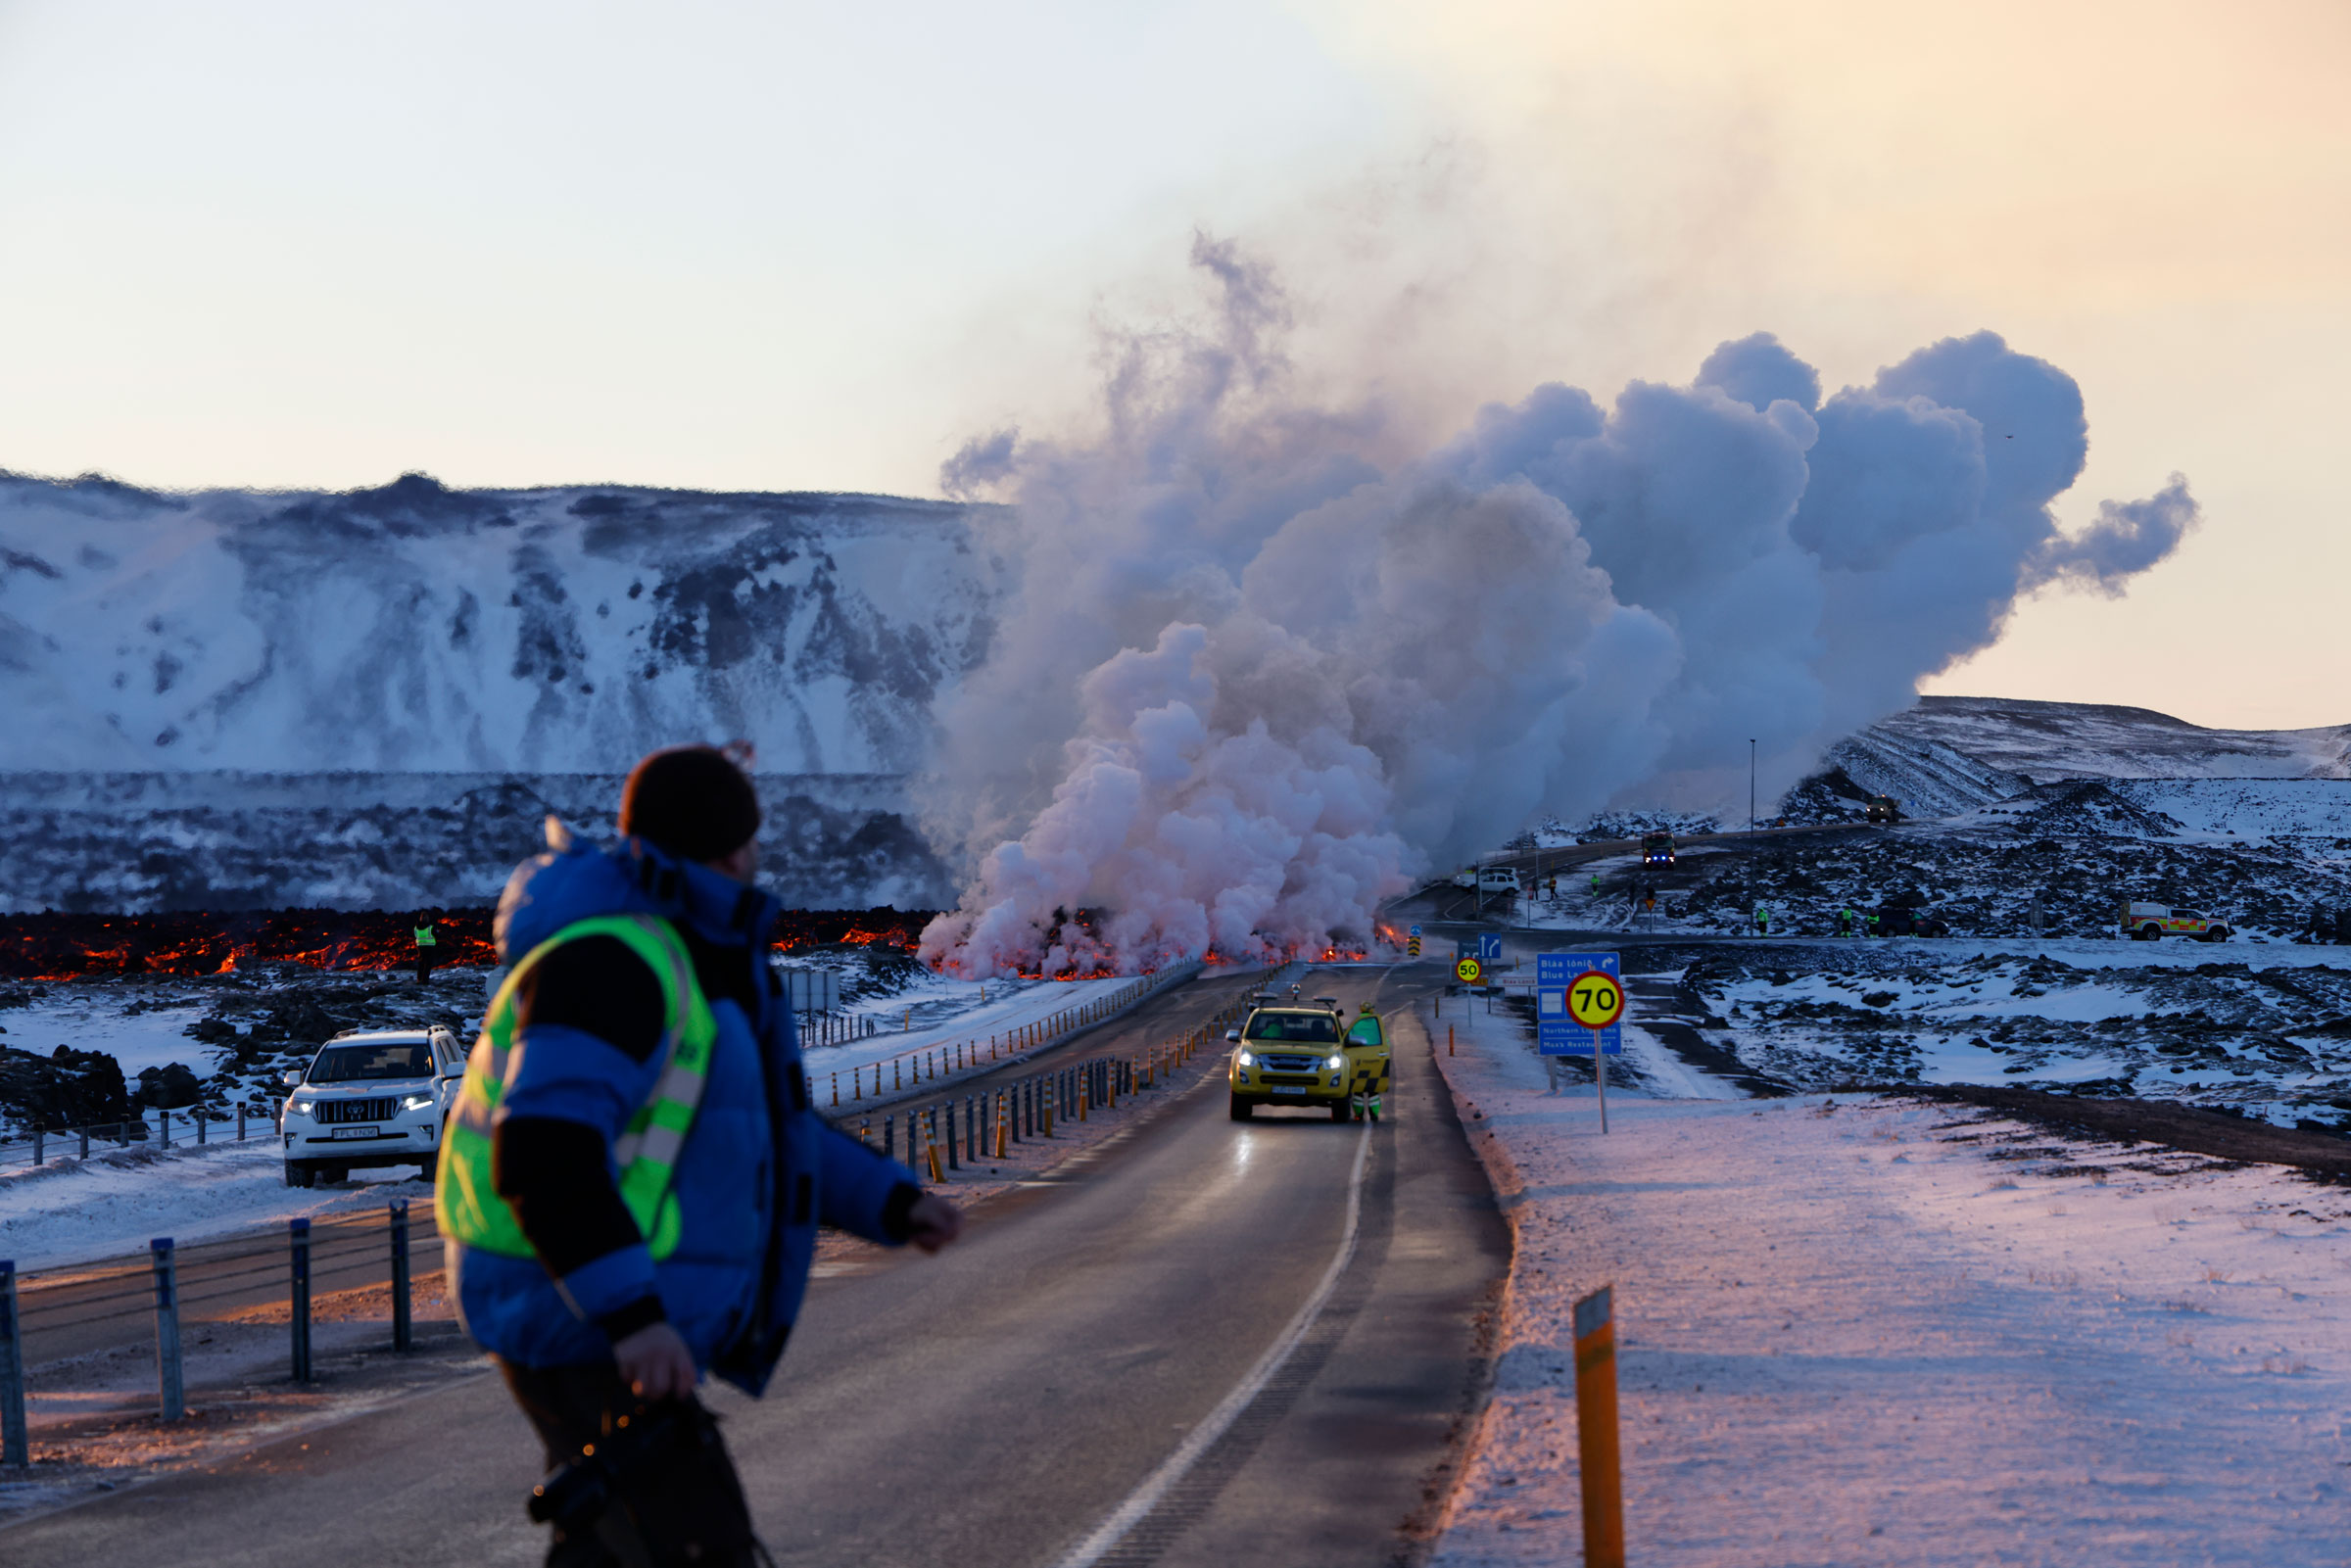 Emergency services close a road as lava erupts from a fissure in Grandavík, Iceland.